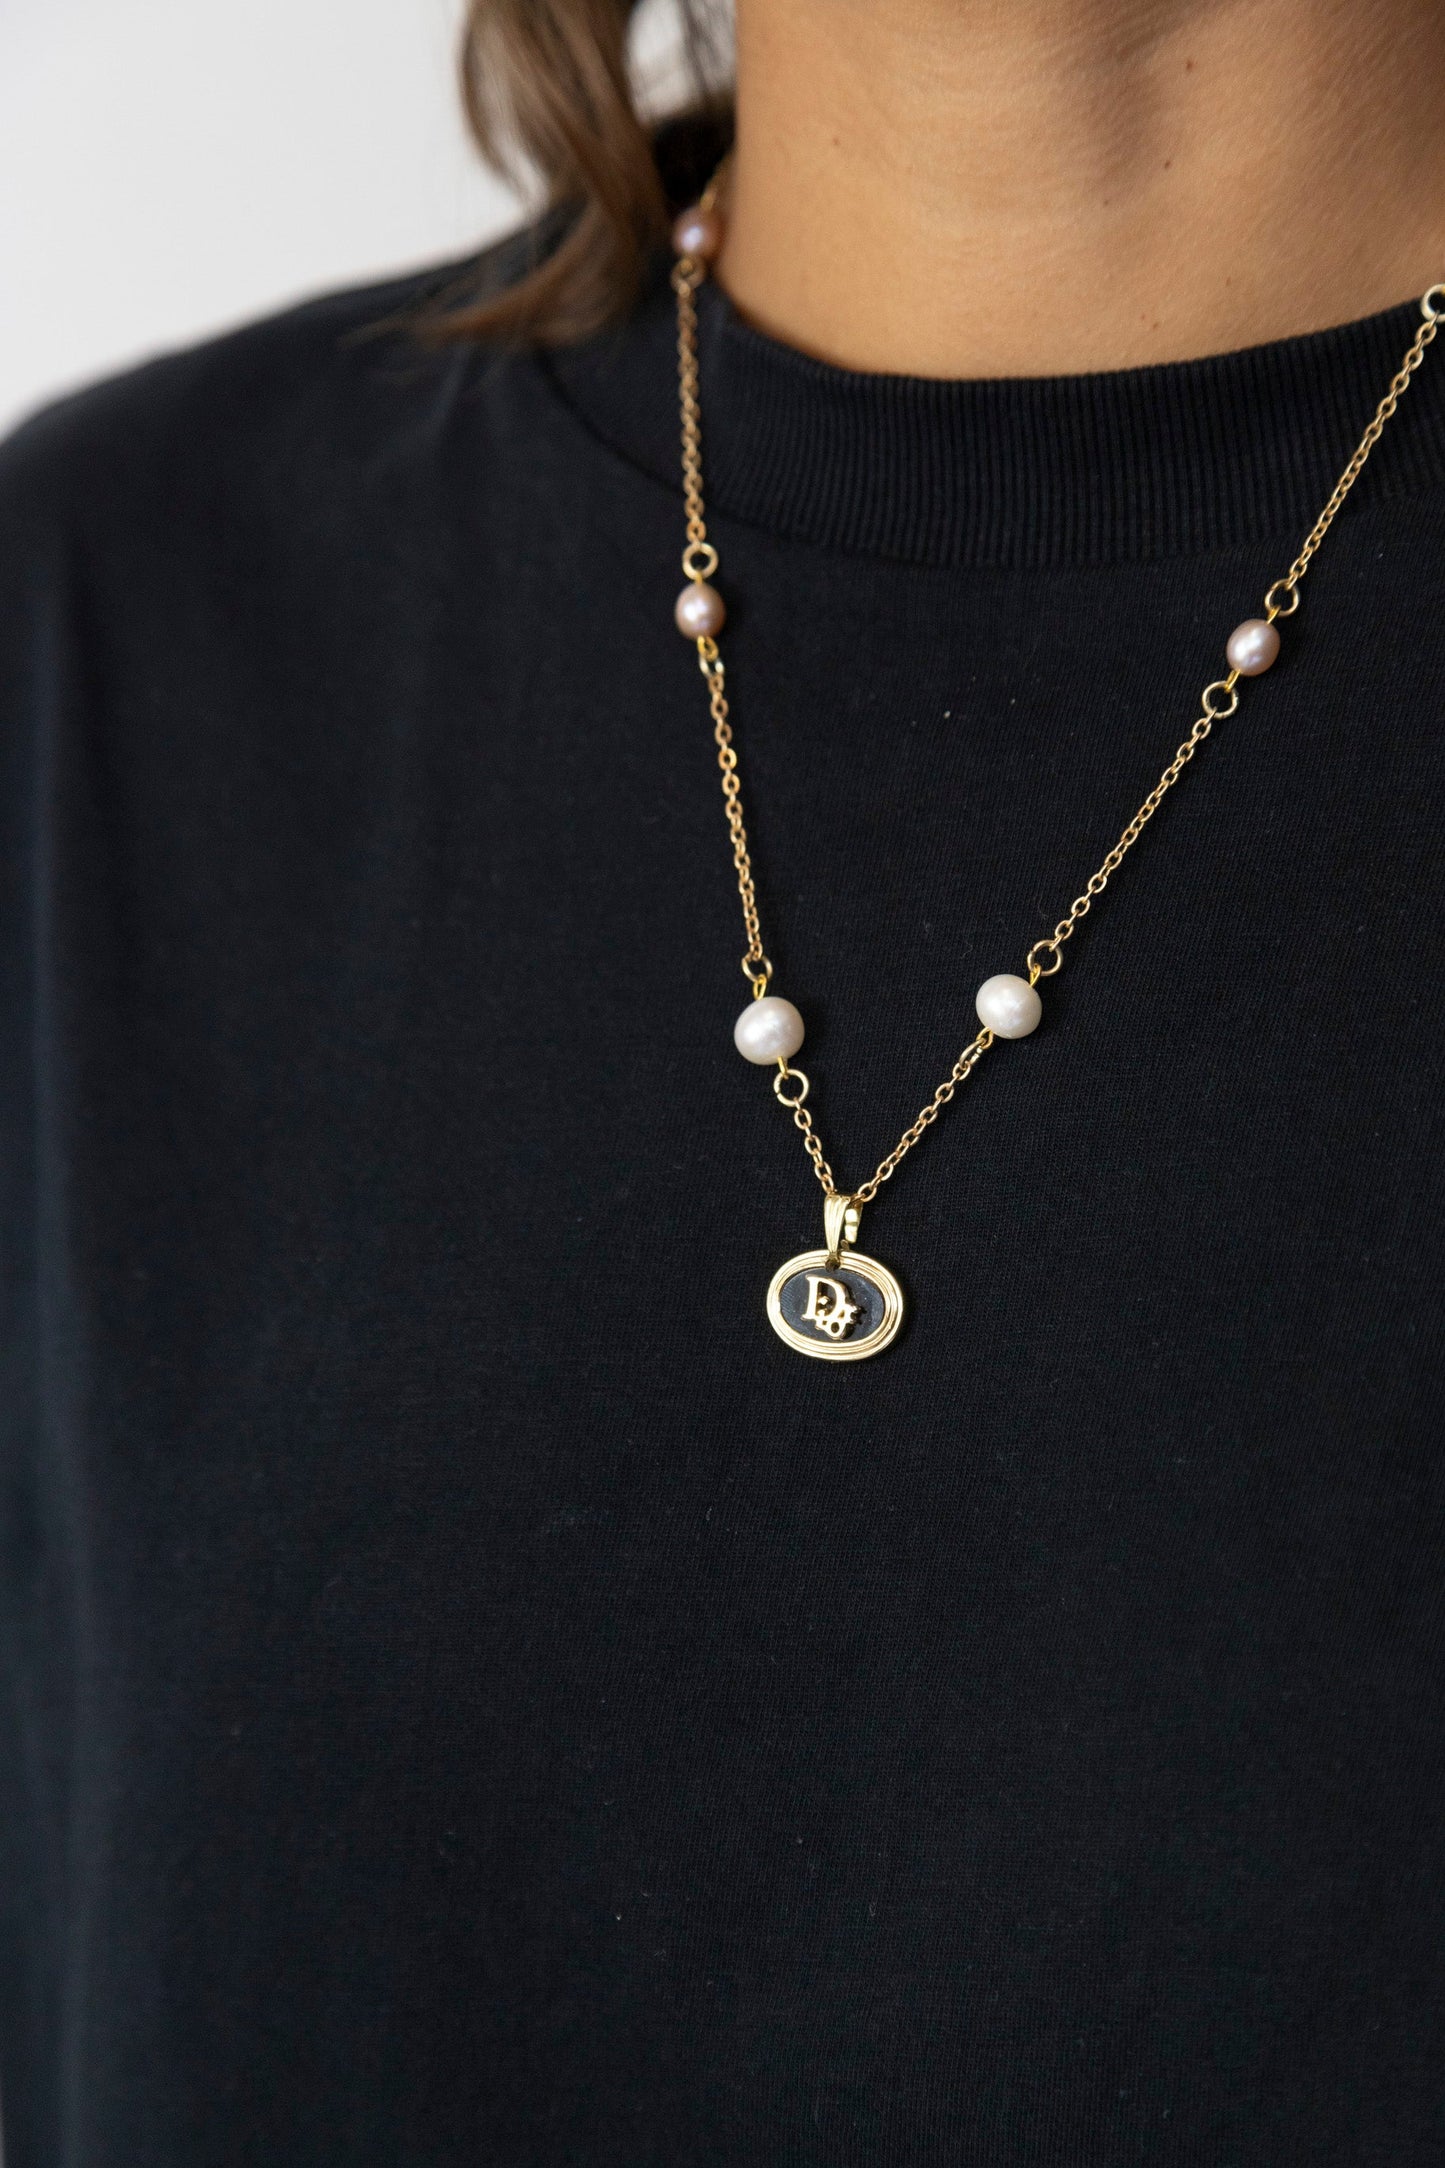 VT Rework: Christian Dior Link Pink Pearl Chain Necklace